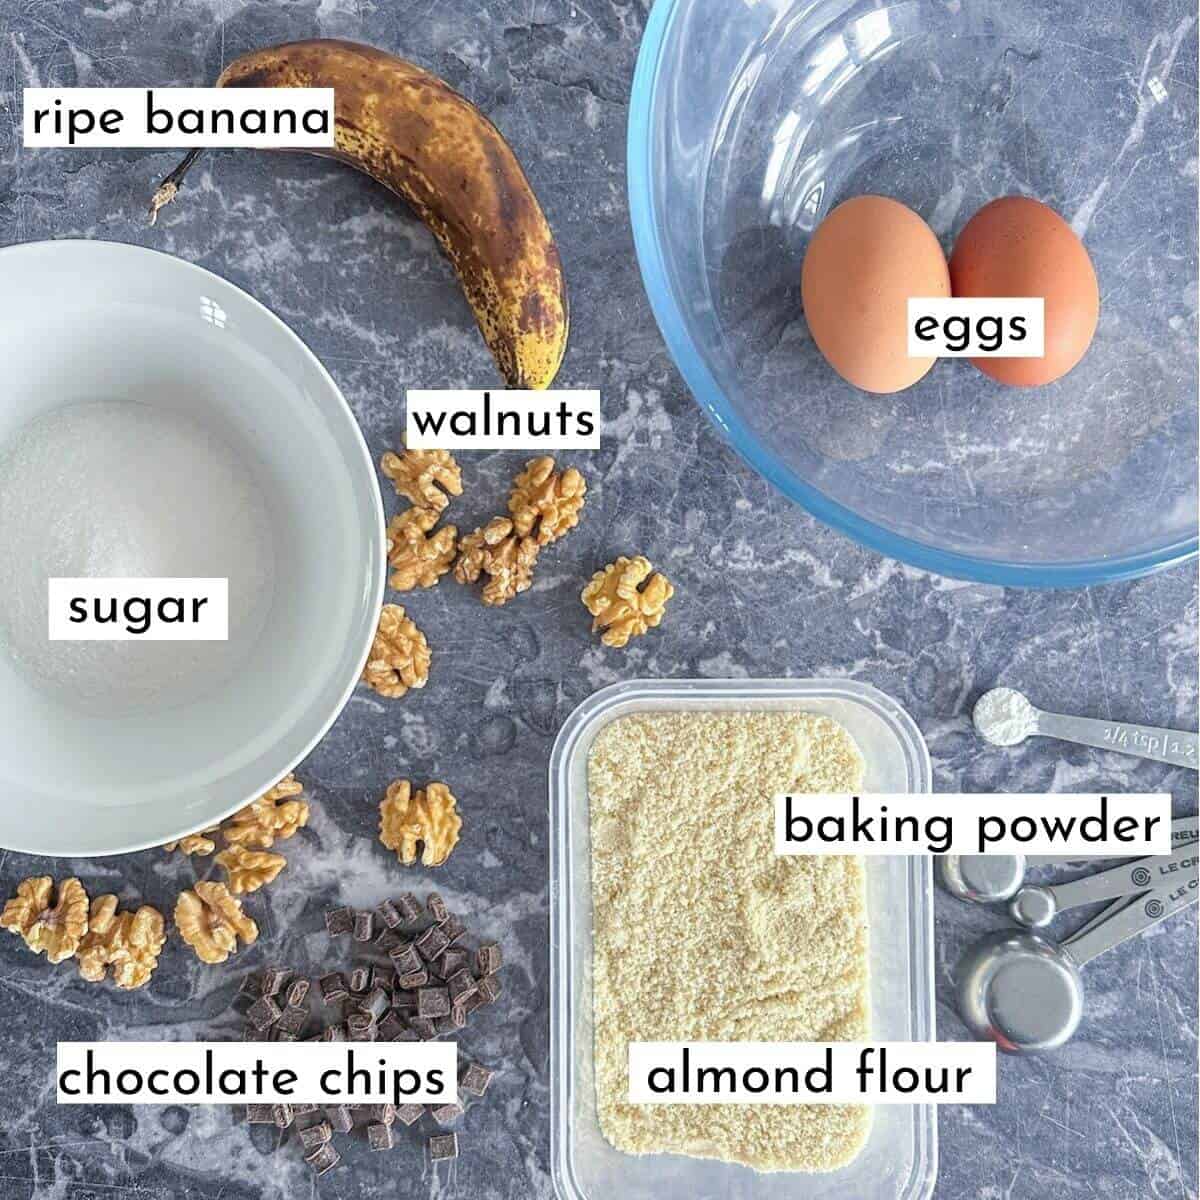 Ingredients for banana sponge pudding on a worktop. Banana, sugar, flour, almond flour, eggs, chocolate chips, walnuts and baking powder. 